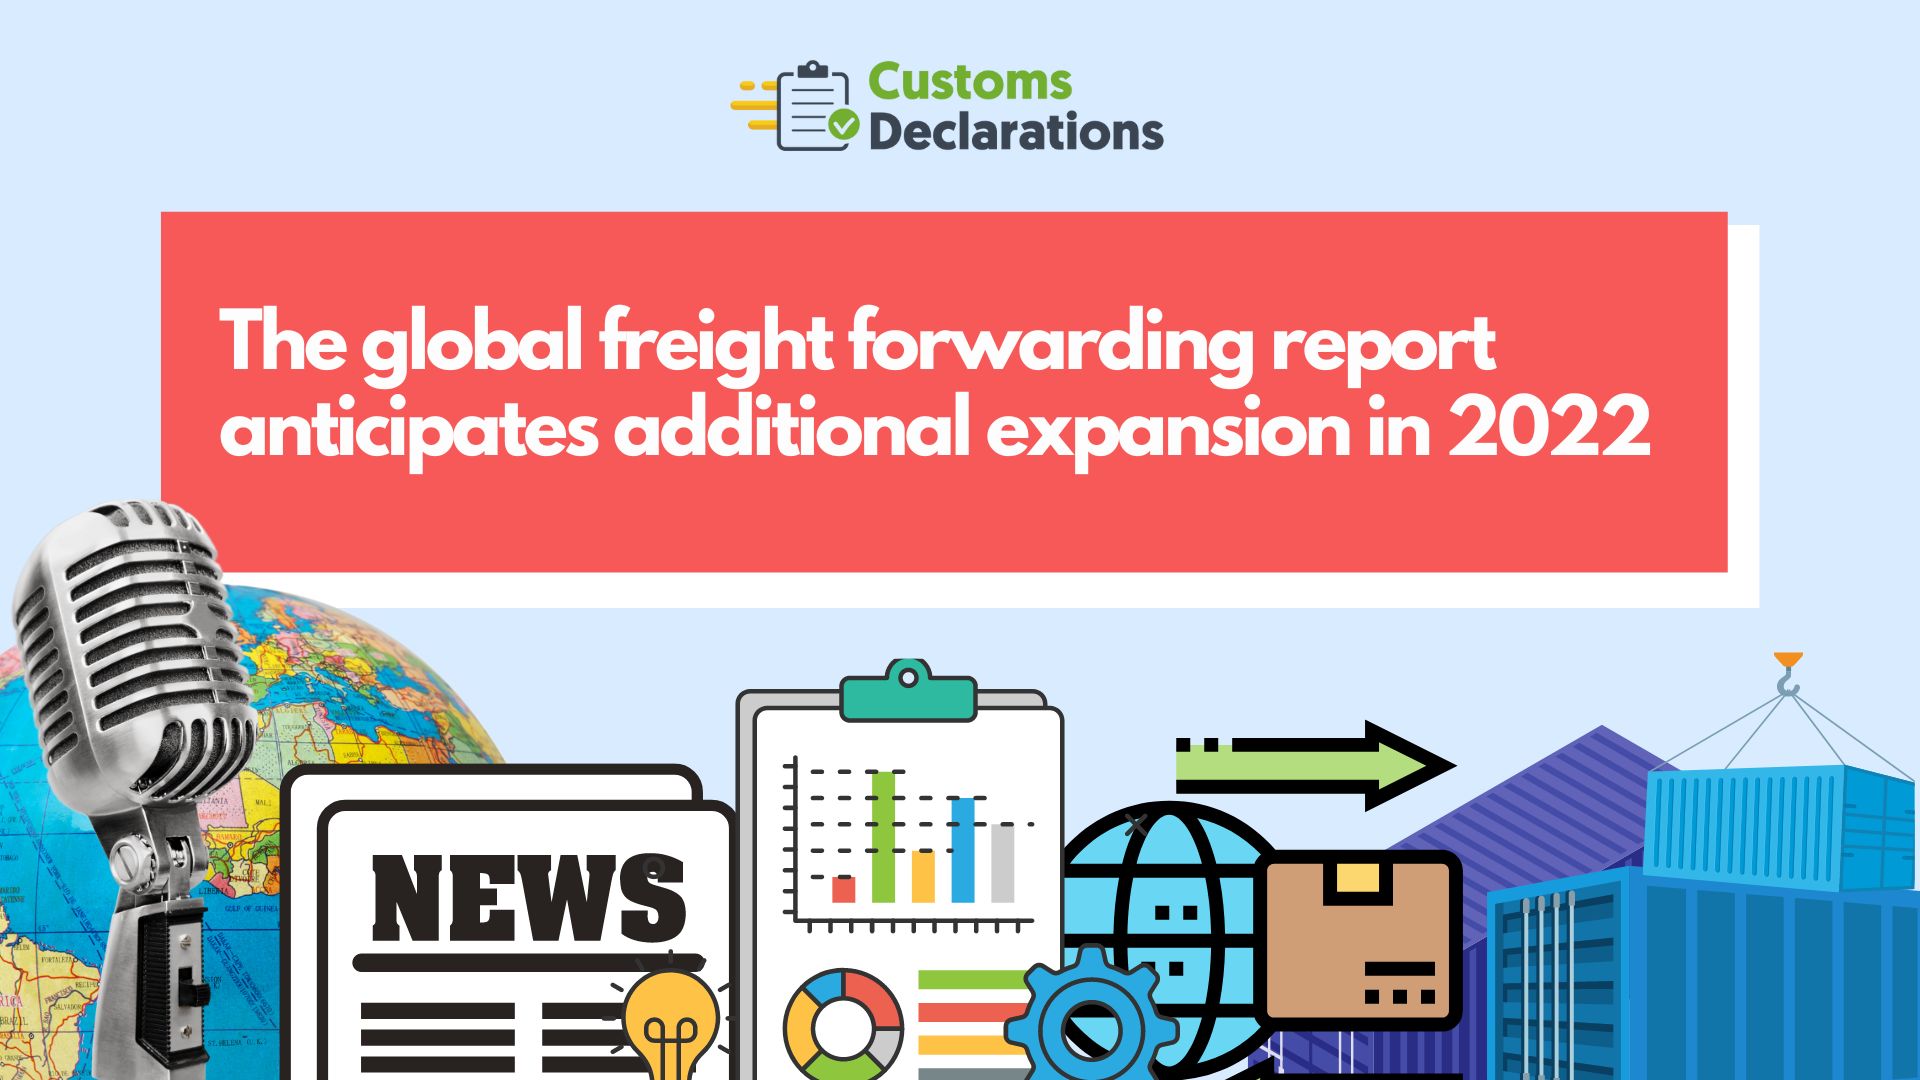 The global freight forwarding report anticipates additional expansion in 2022